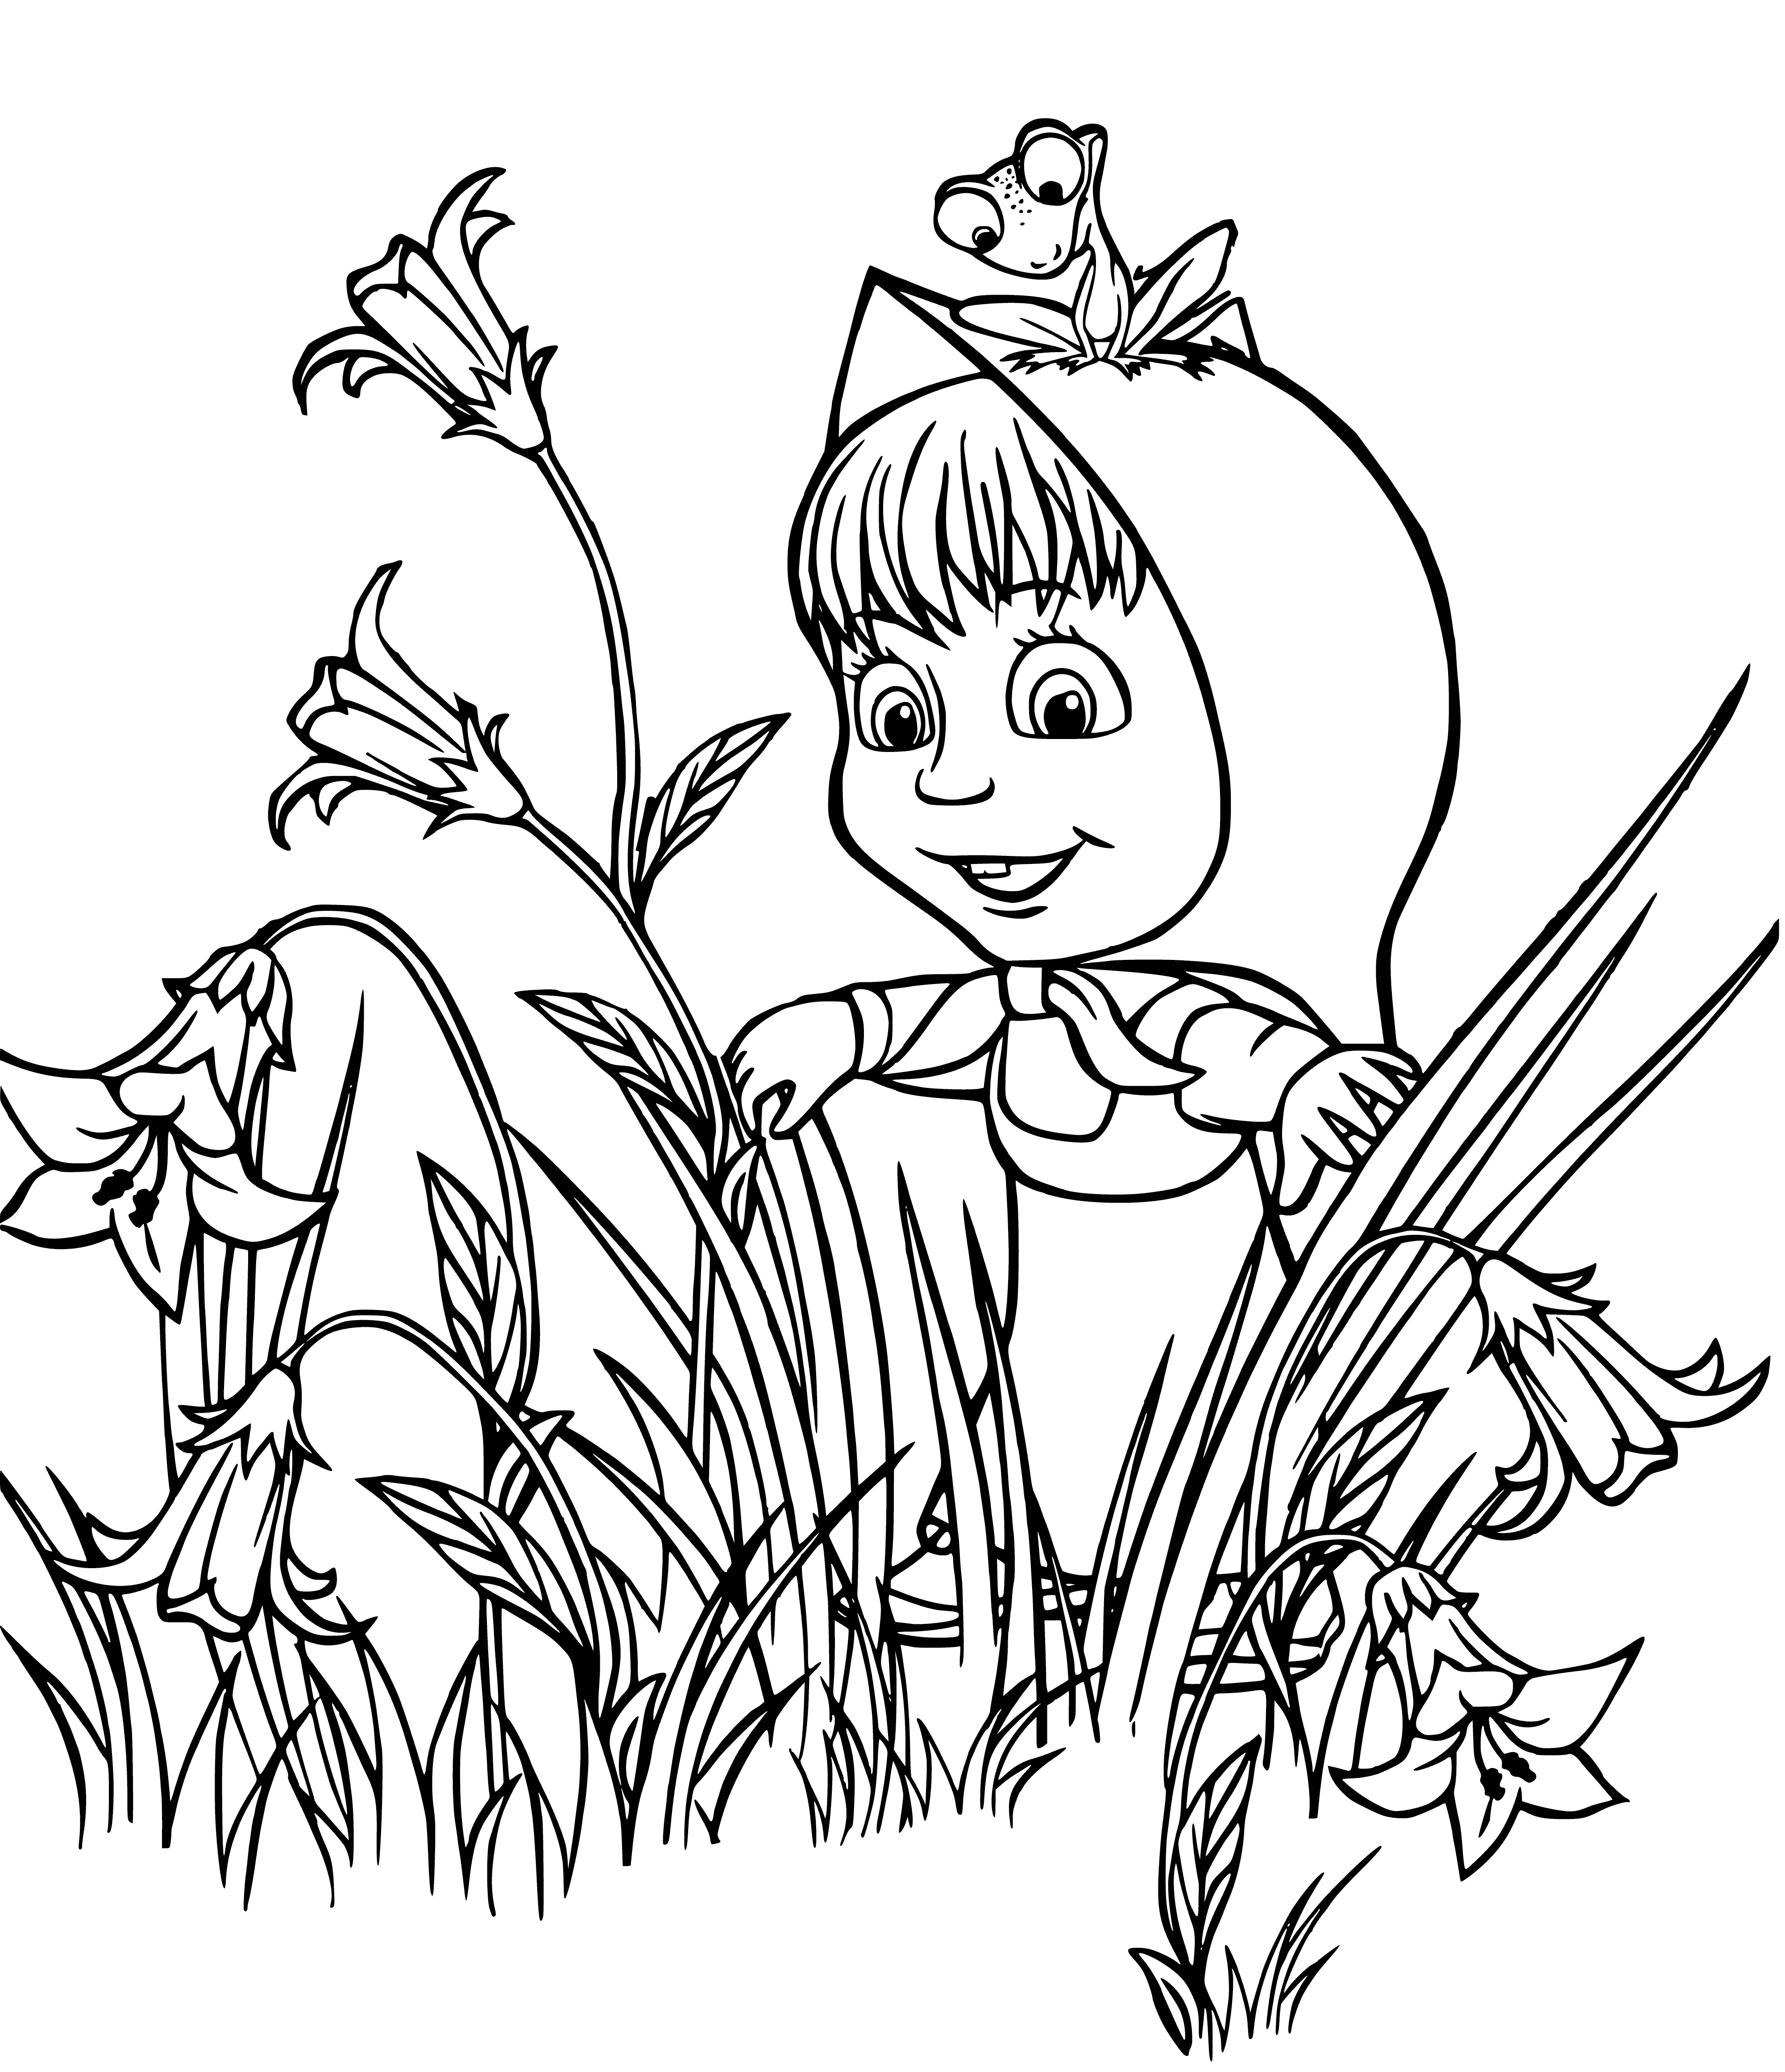 coloring page: Masha is a mischievous girl wearing a red dress, with a red scarf, standing in front of a large tree, looking at the camera.